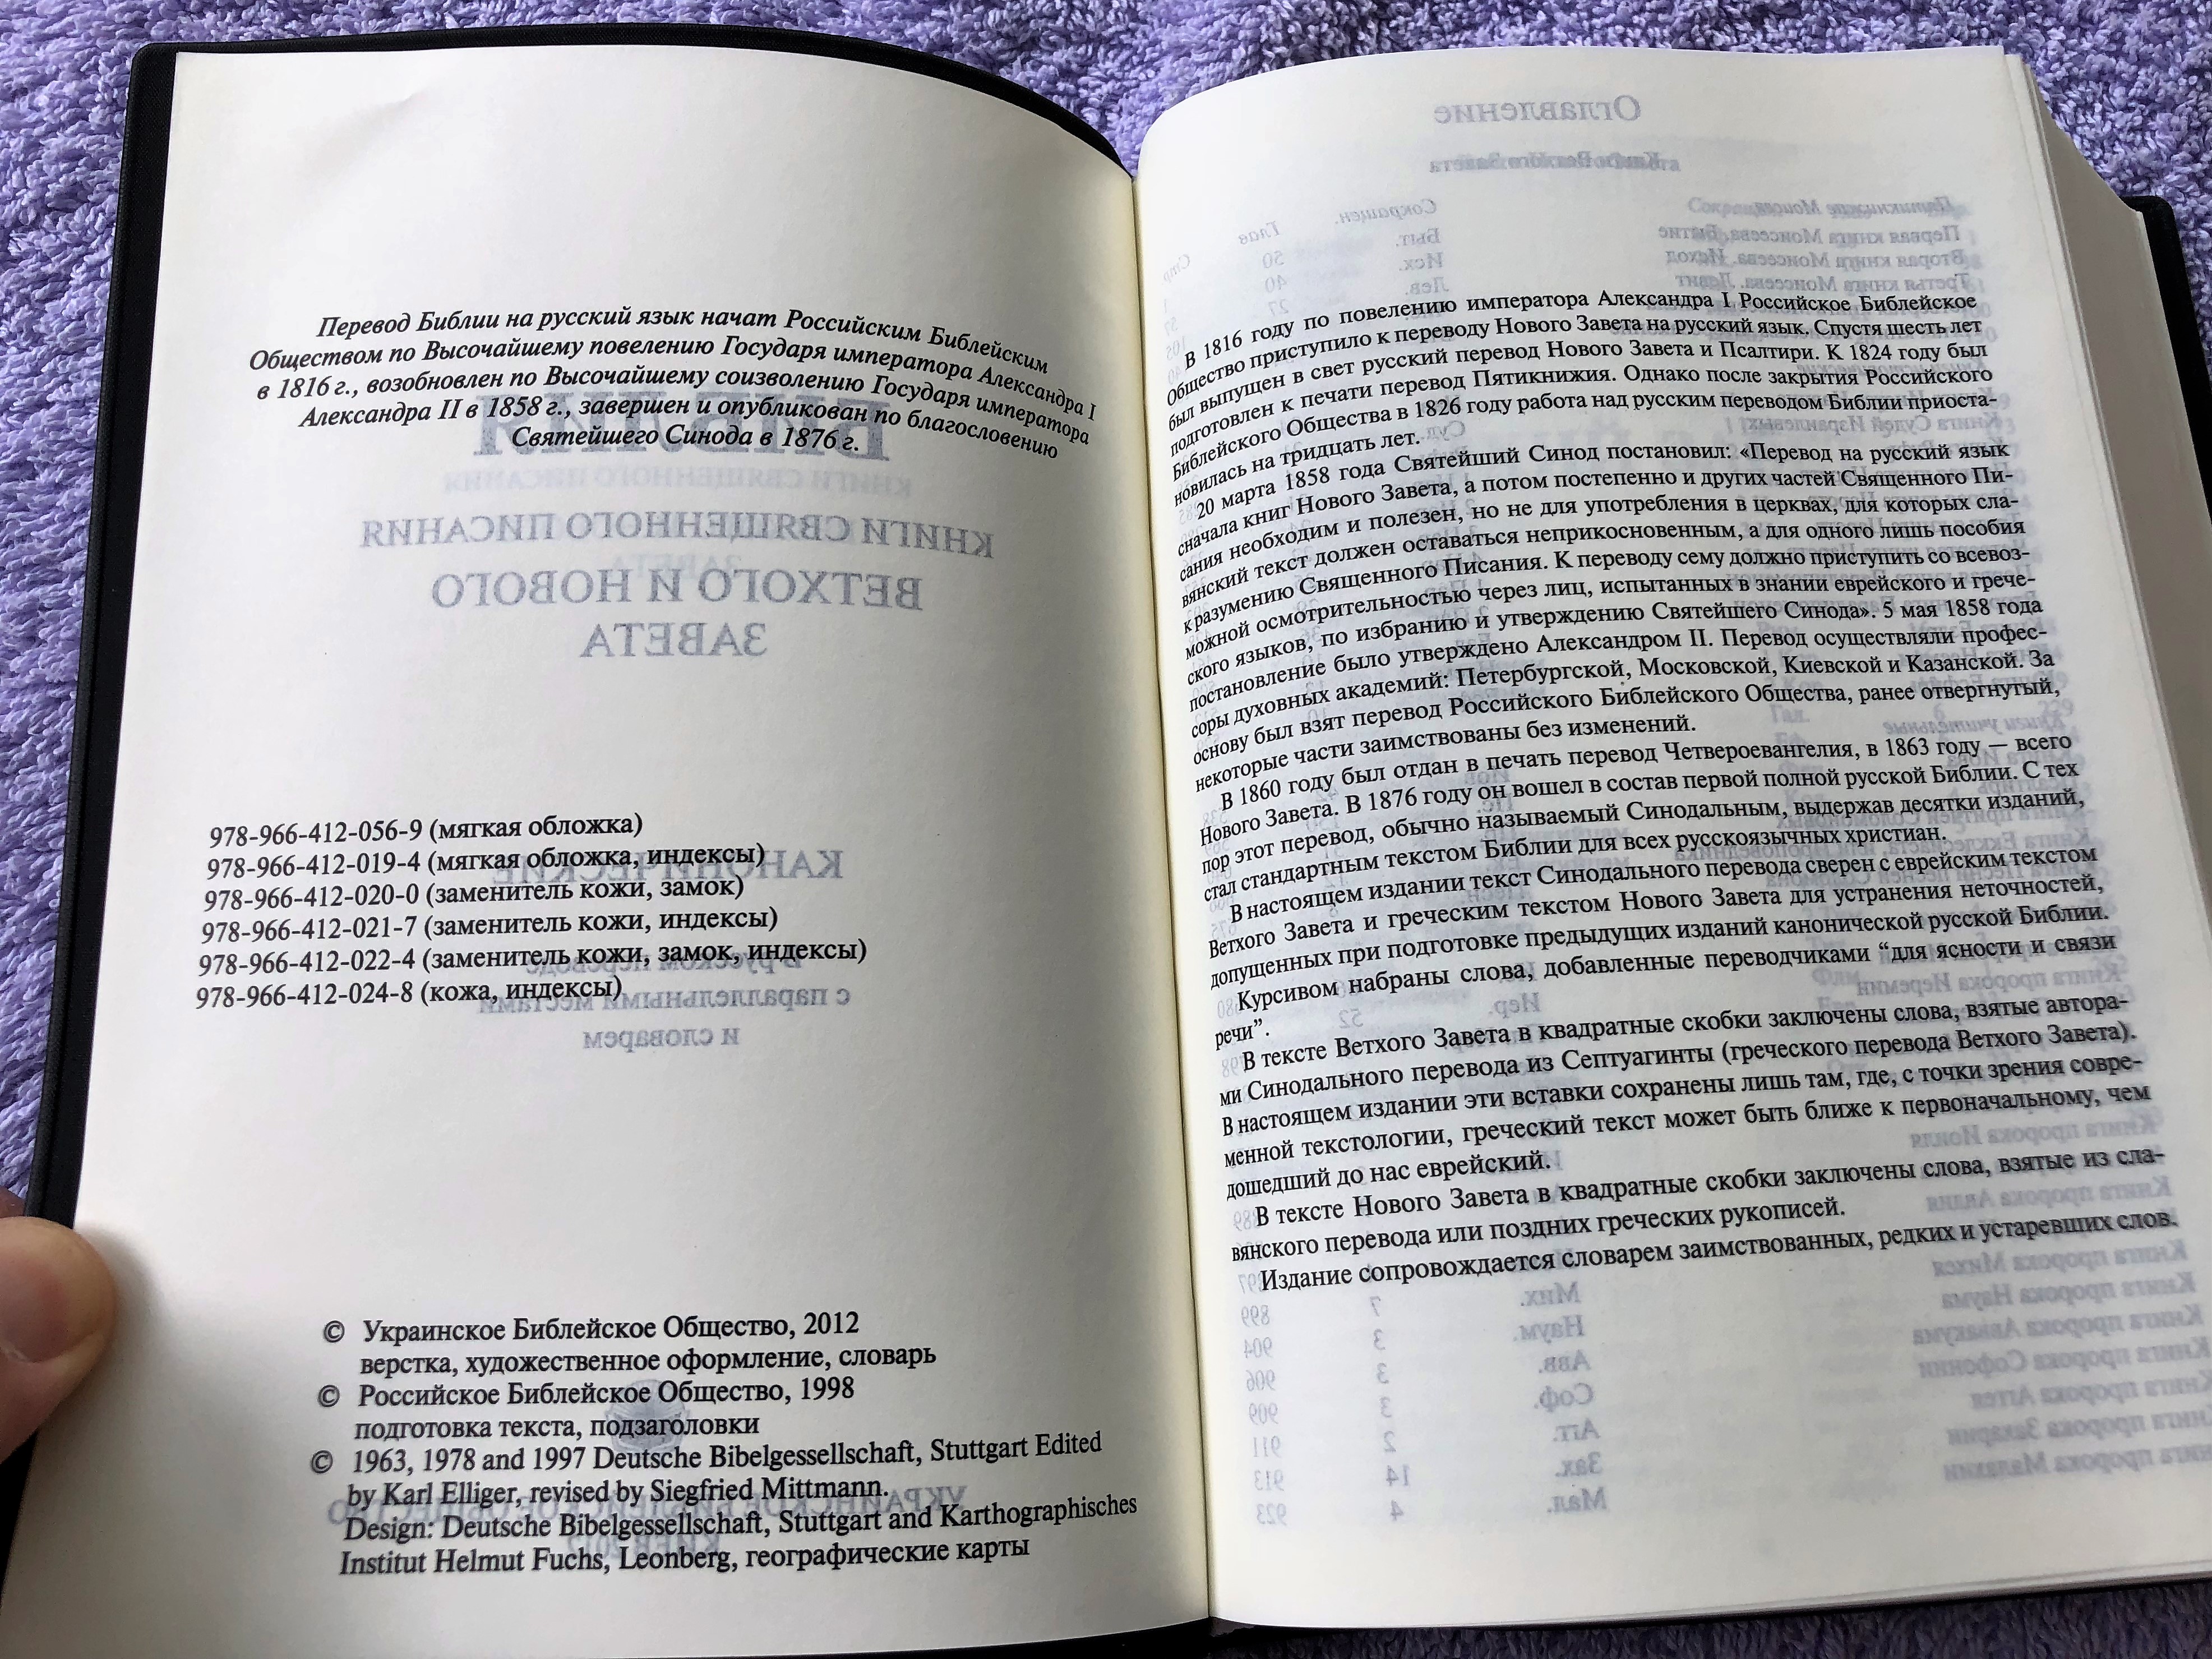 russian-bible-published-by-the-ukrainian-bible-society-7-.jpg